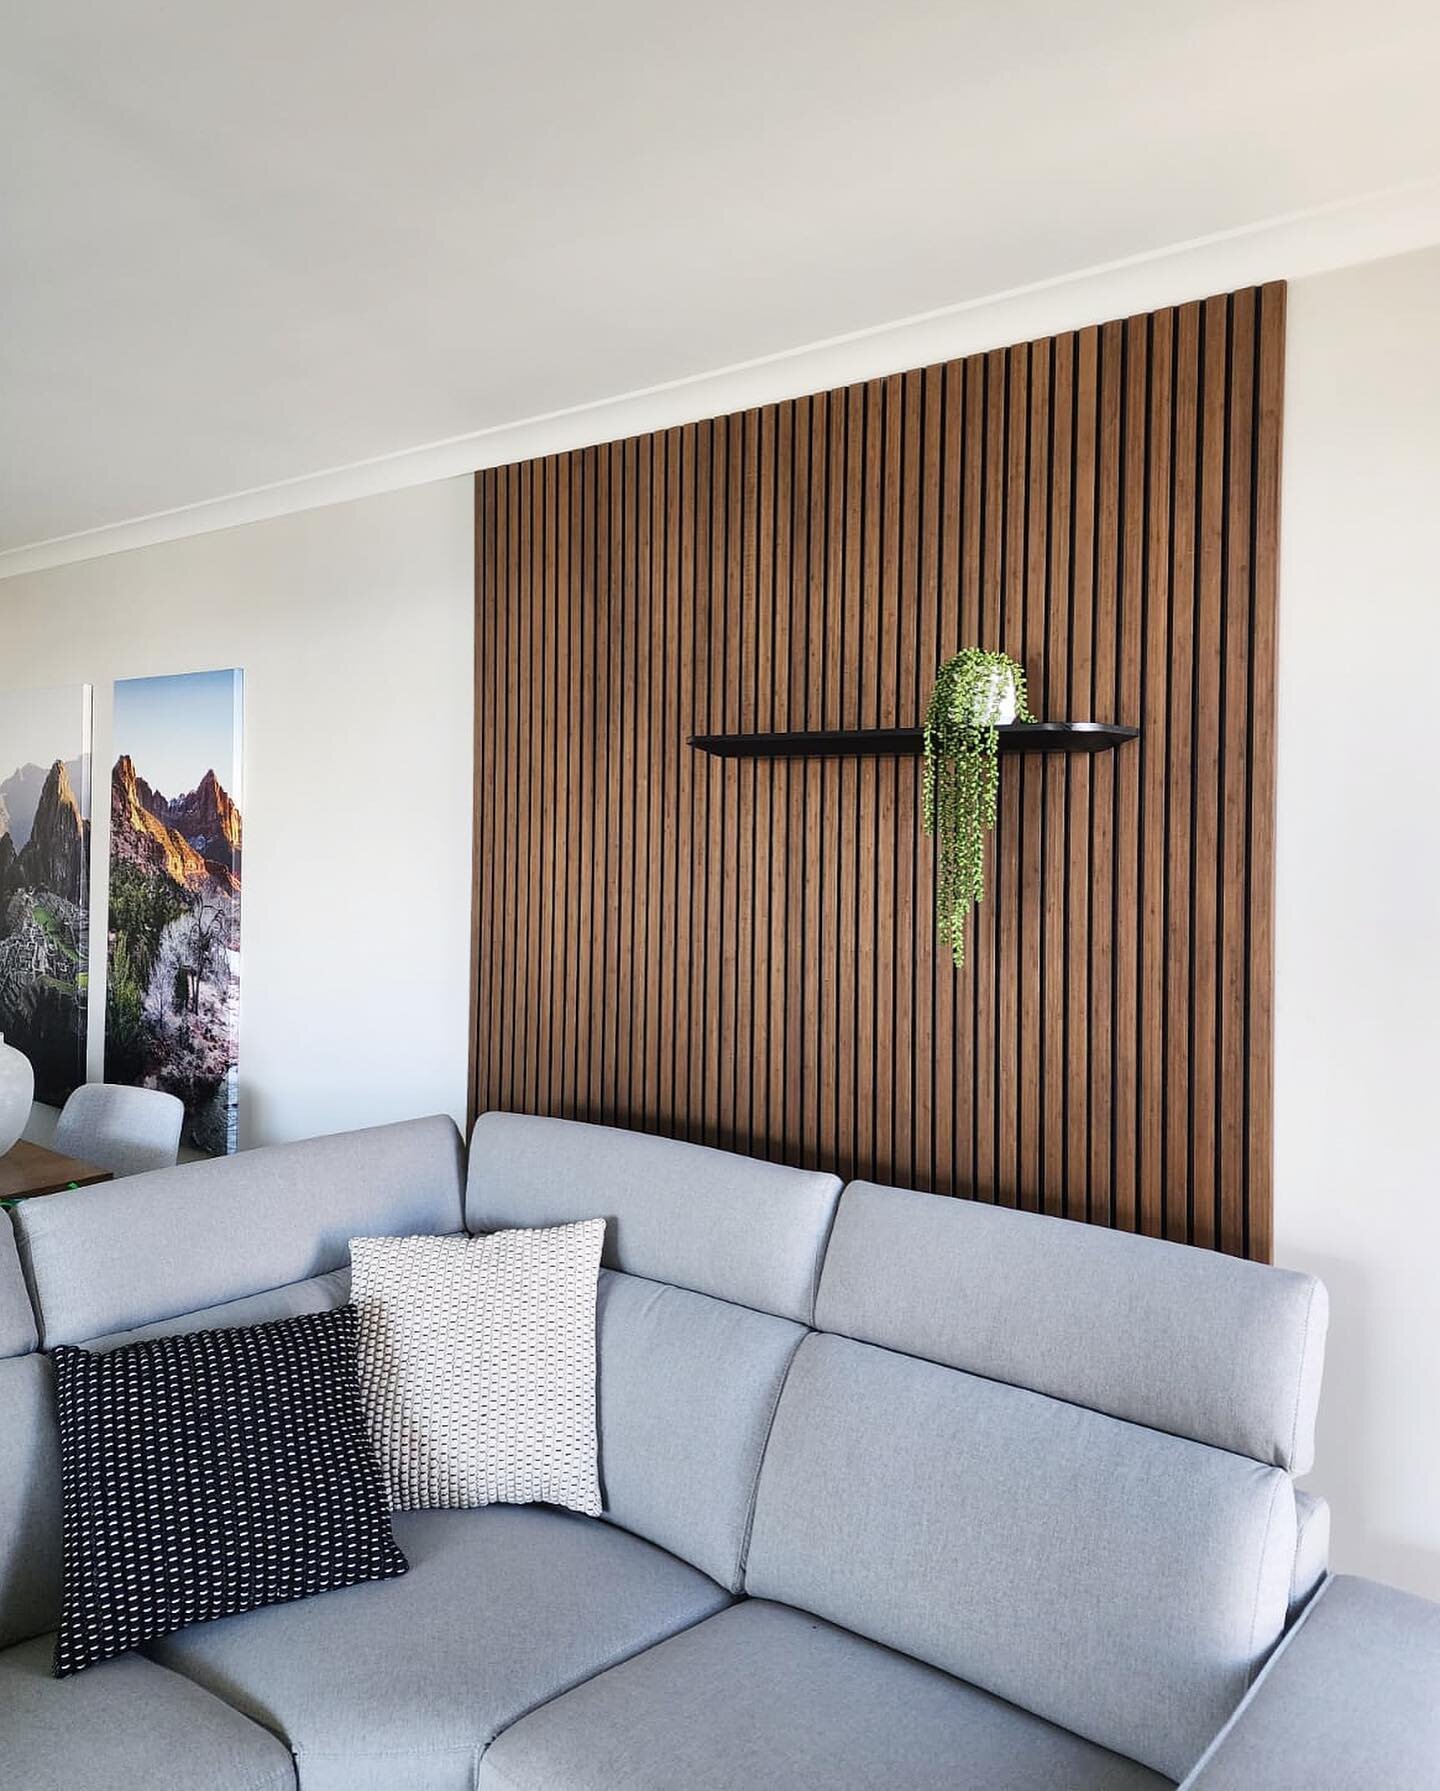 The combination of rich Walnut with a stand-out black groove makes our bamboo panelling pop as a focal point in this customers living room.
Once again demonstrating that less can absolutely be more! 🔥 

Always a pleasure working with @alanaointerior